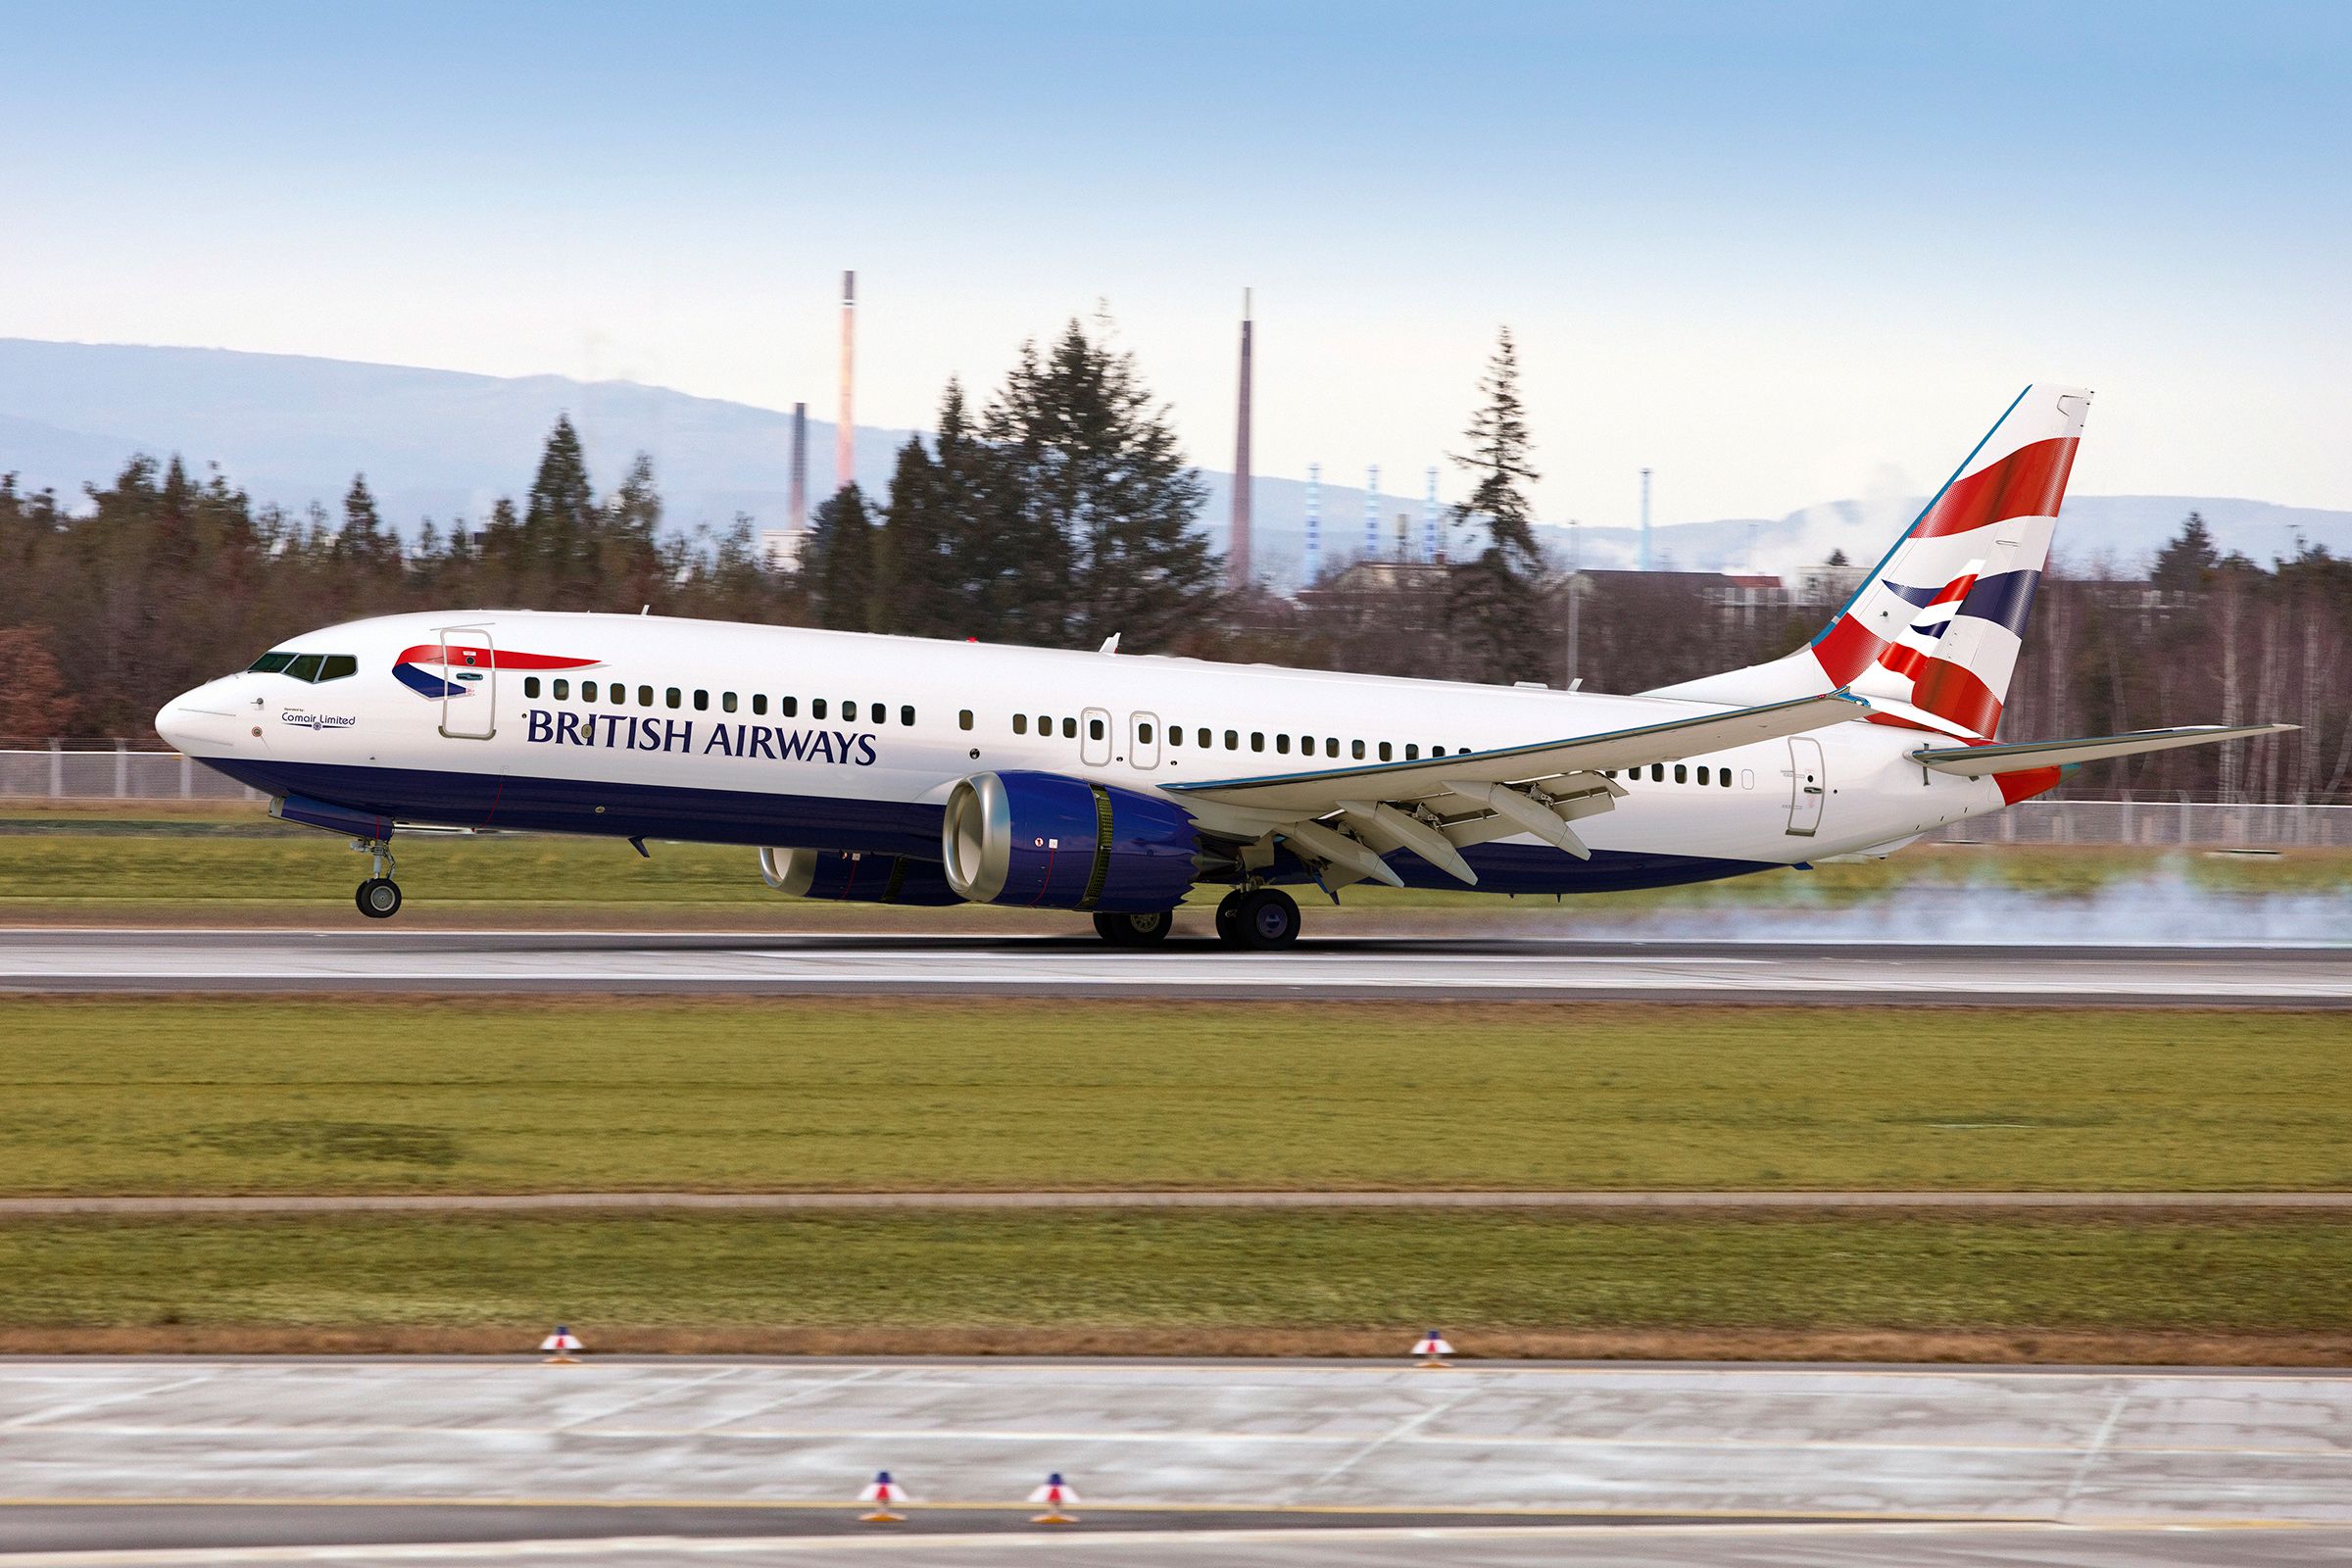 A Comair Boeing 737 MAX in the British Airways livery touches down with smoke generated by the wheels impacting the runway.